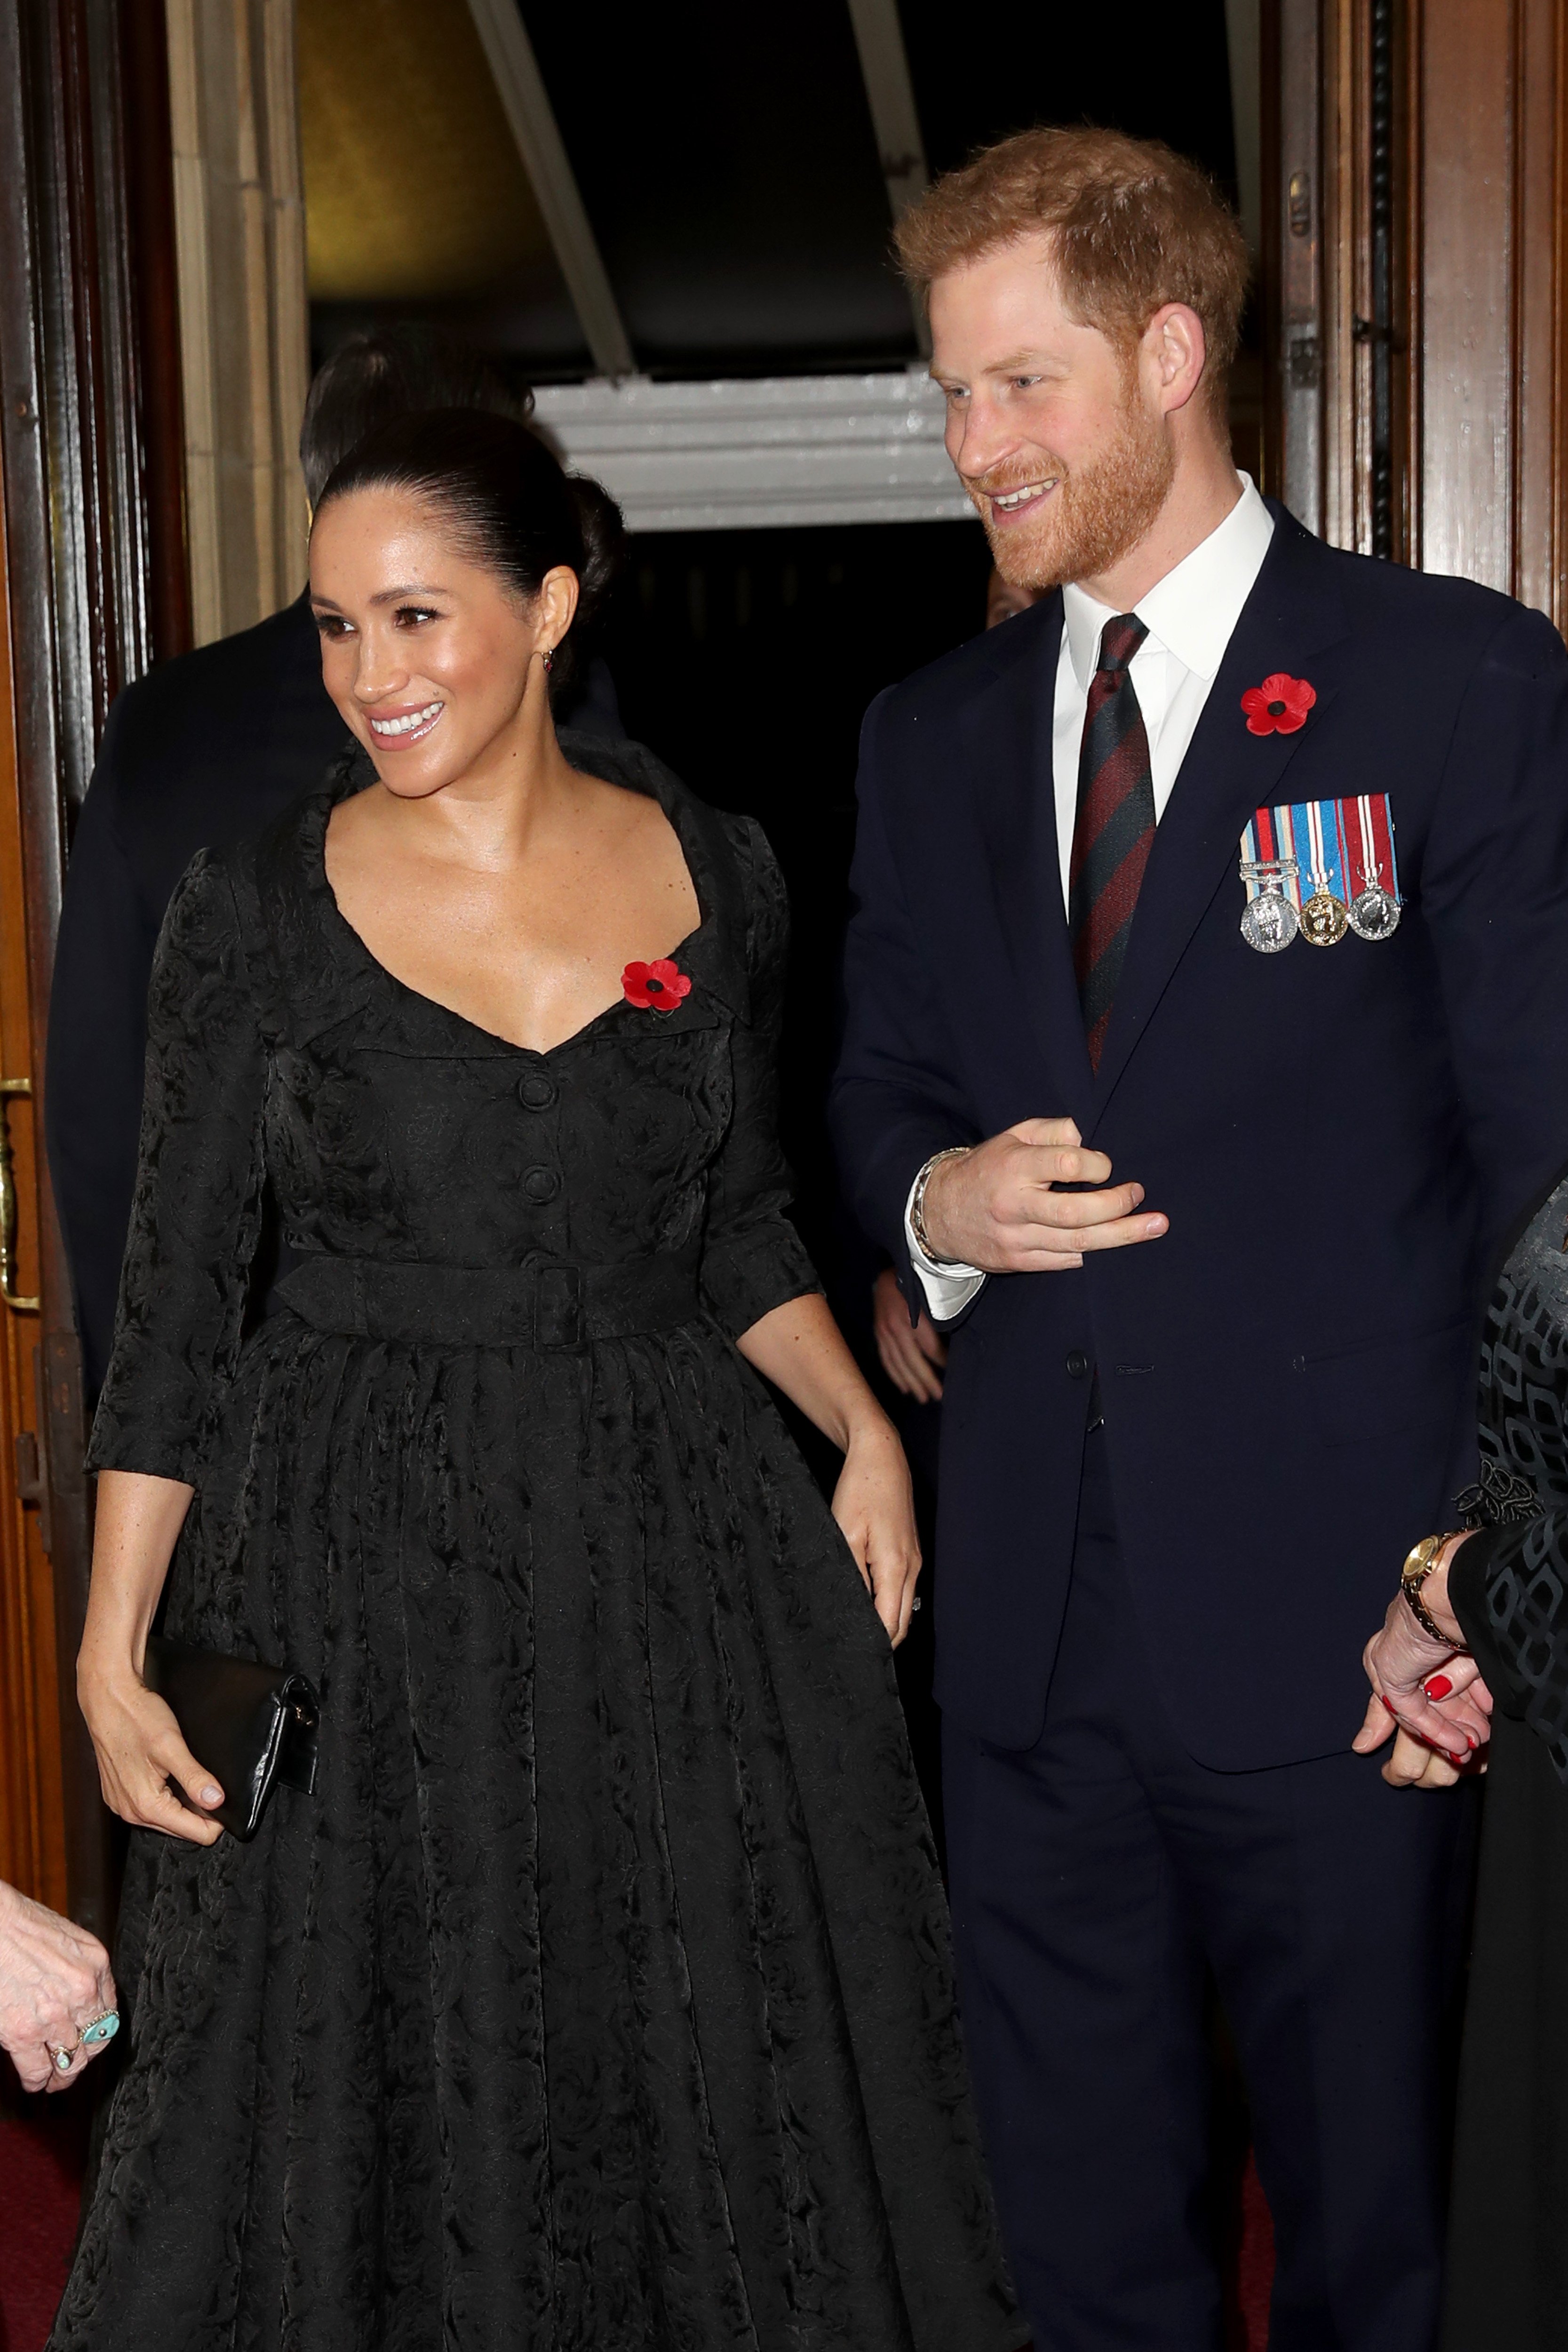 Meghan Markle and Prince Harry at the Festival of Remembrance in London, England on November 9, 2019 | Photo: Getty Images